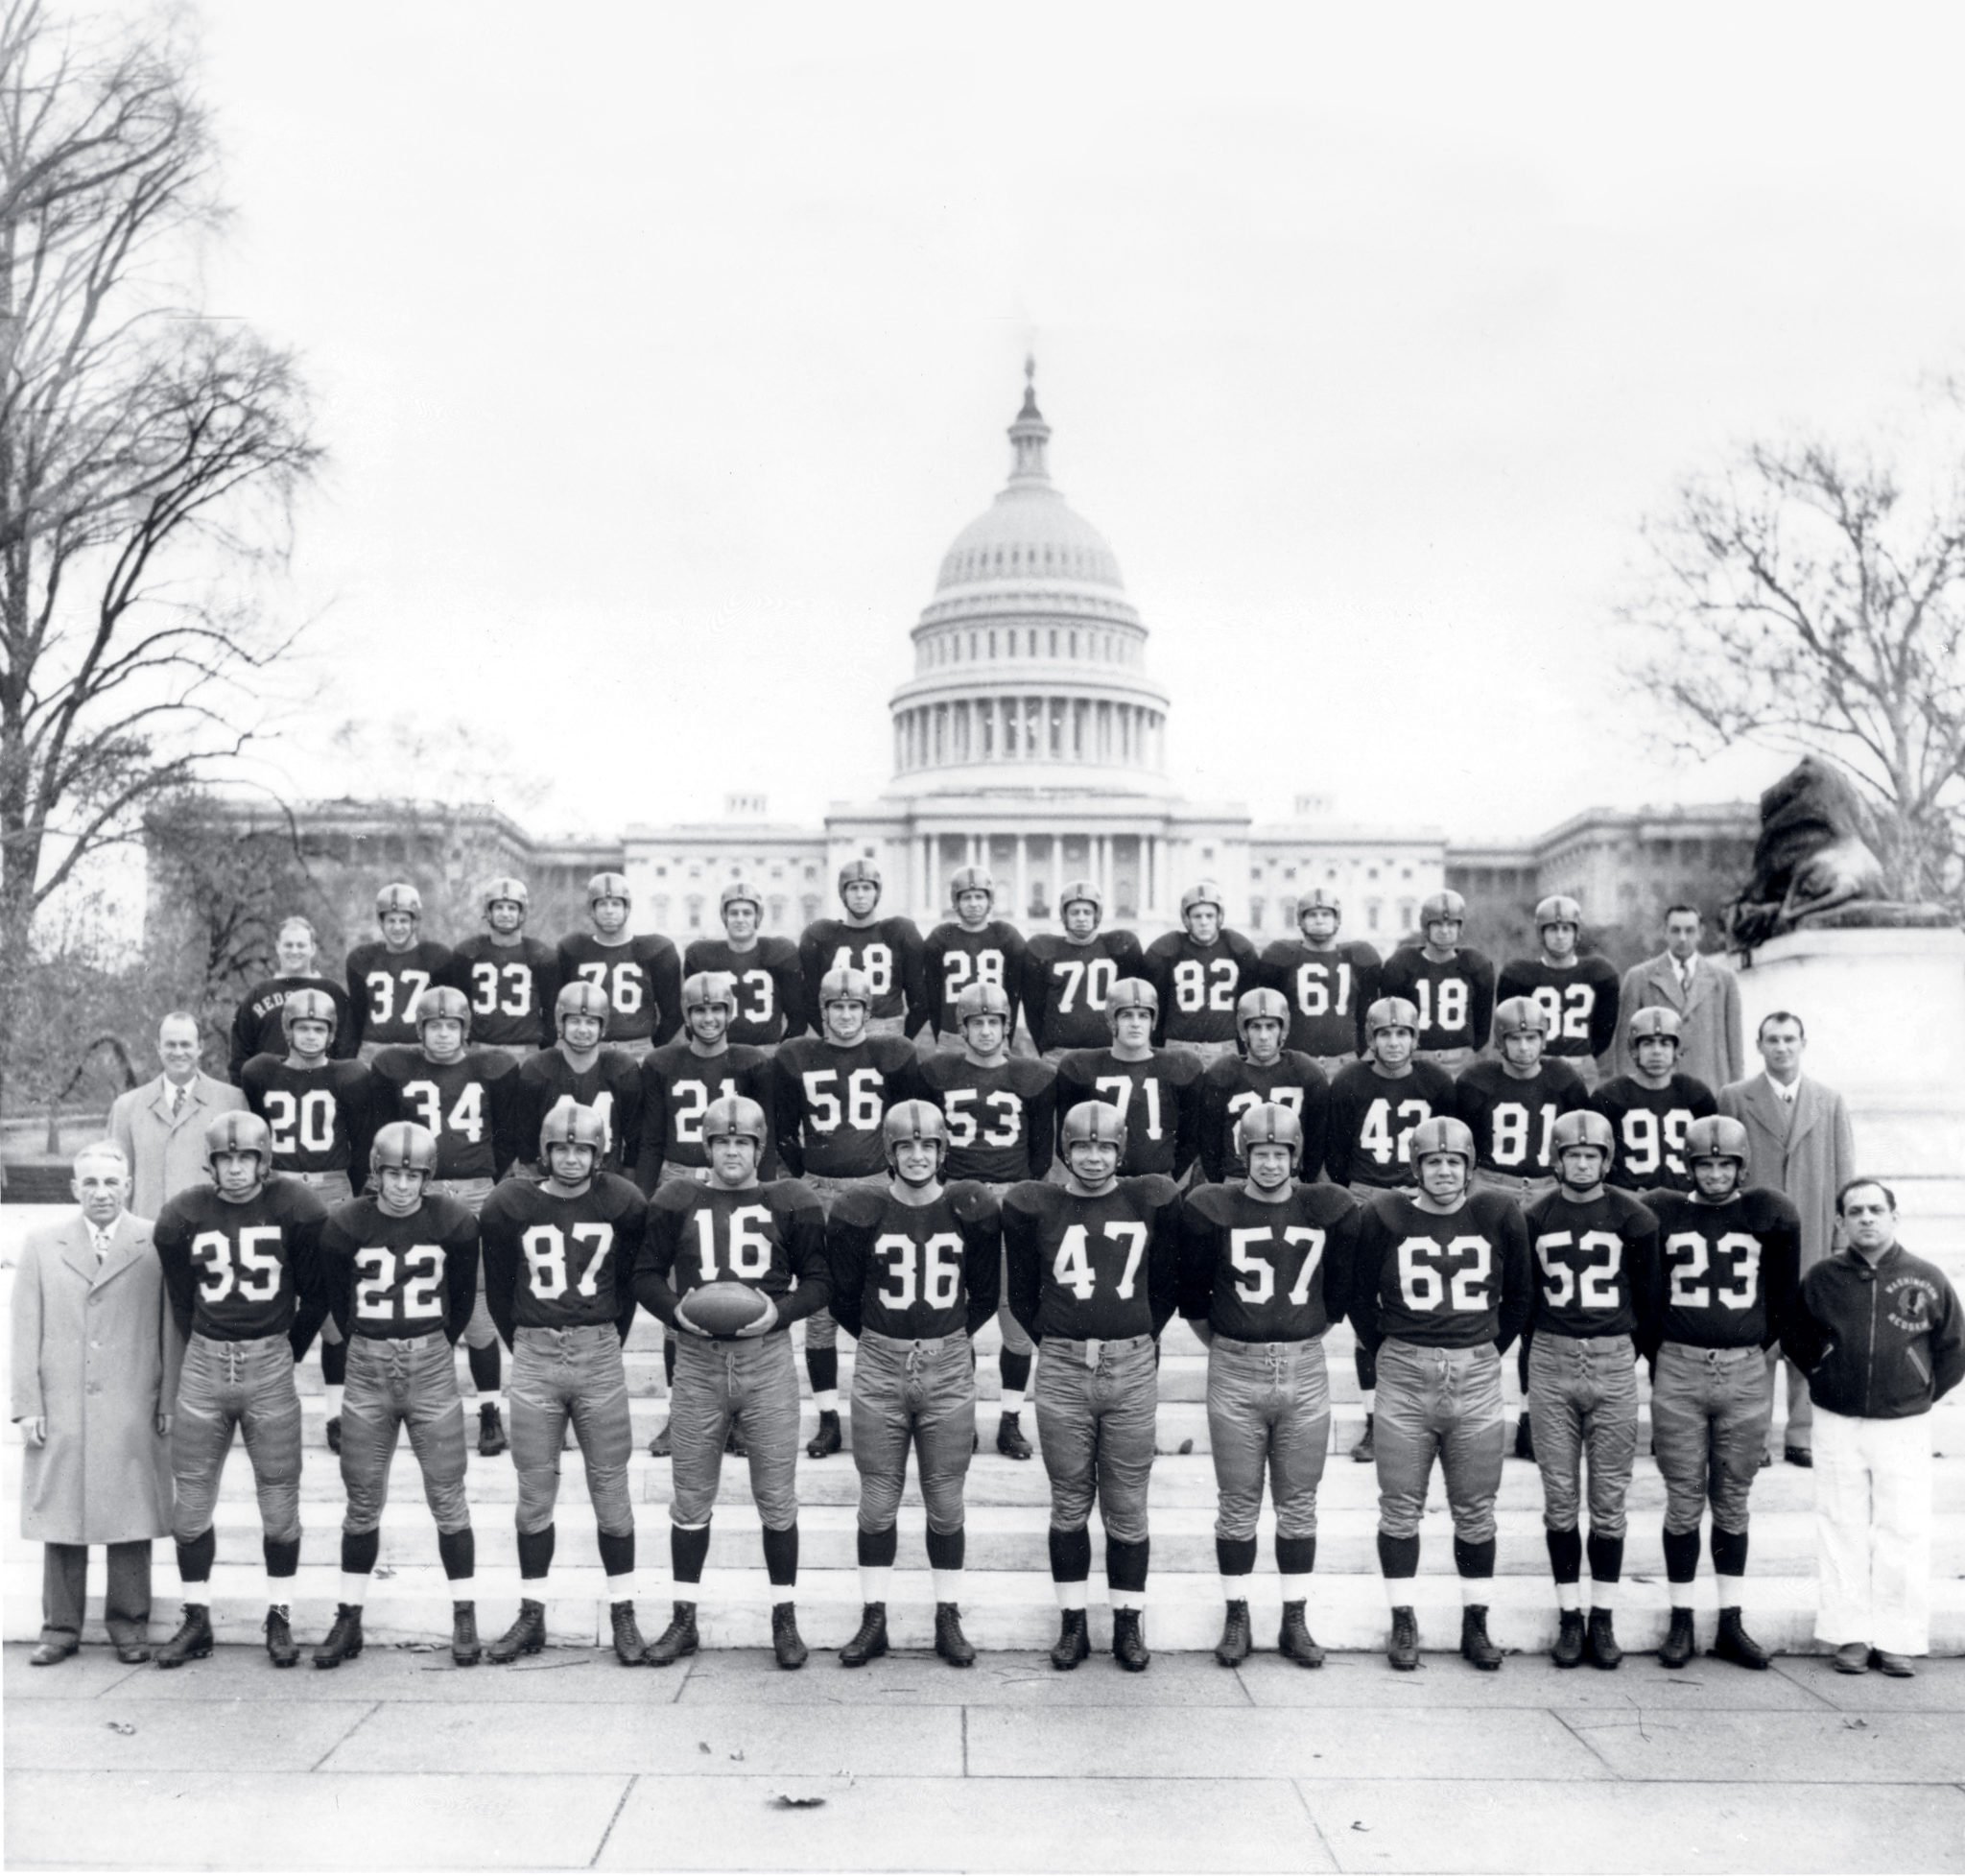 Washington’s football squad in 1950, when it had a 3–9 record. Photograph by AP Photo/Pro Football Hall of Fame.